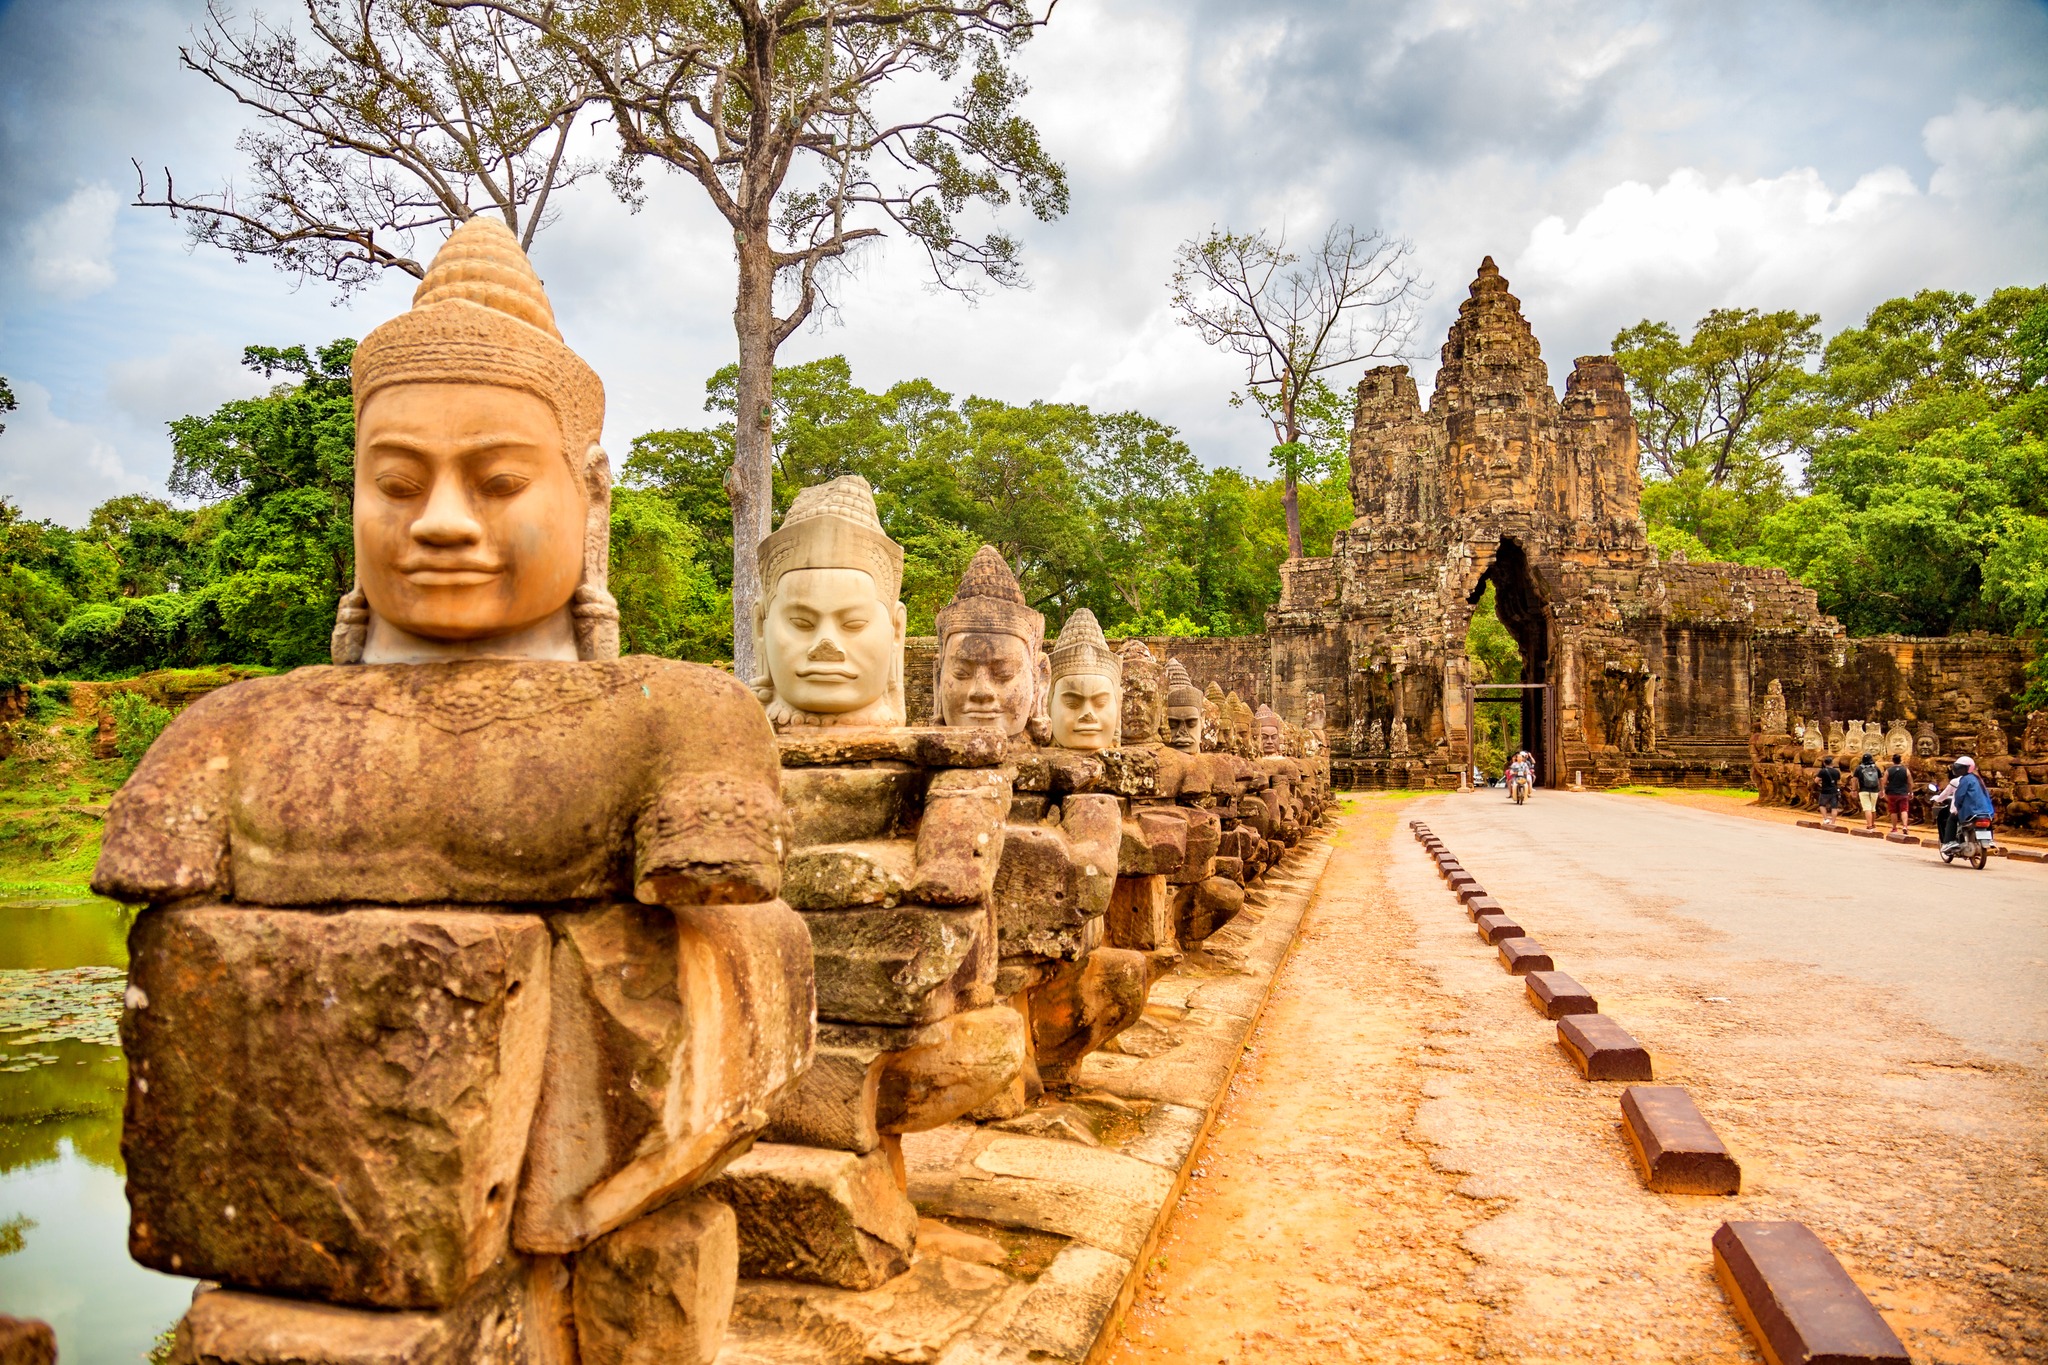 Statues on approach to Angkor Thom in northern Cambodia